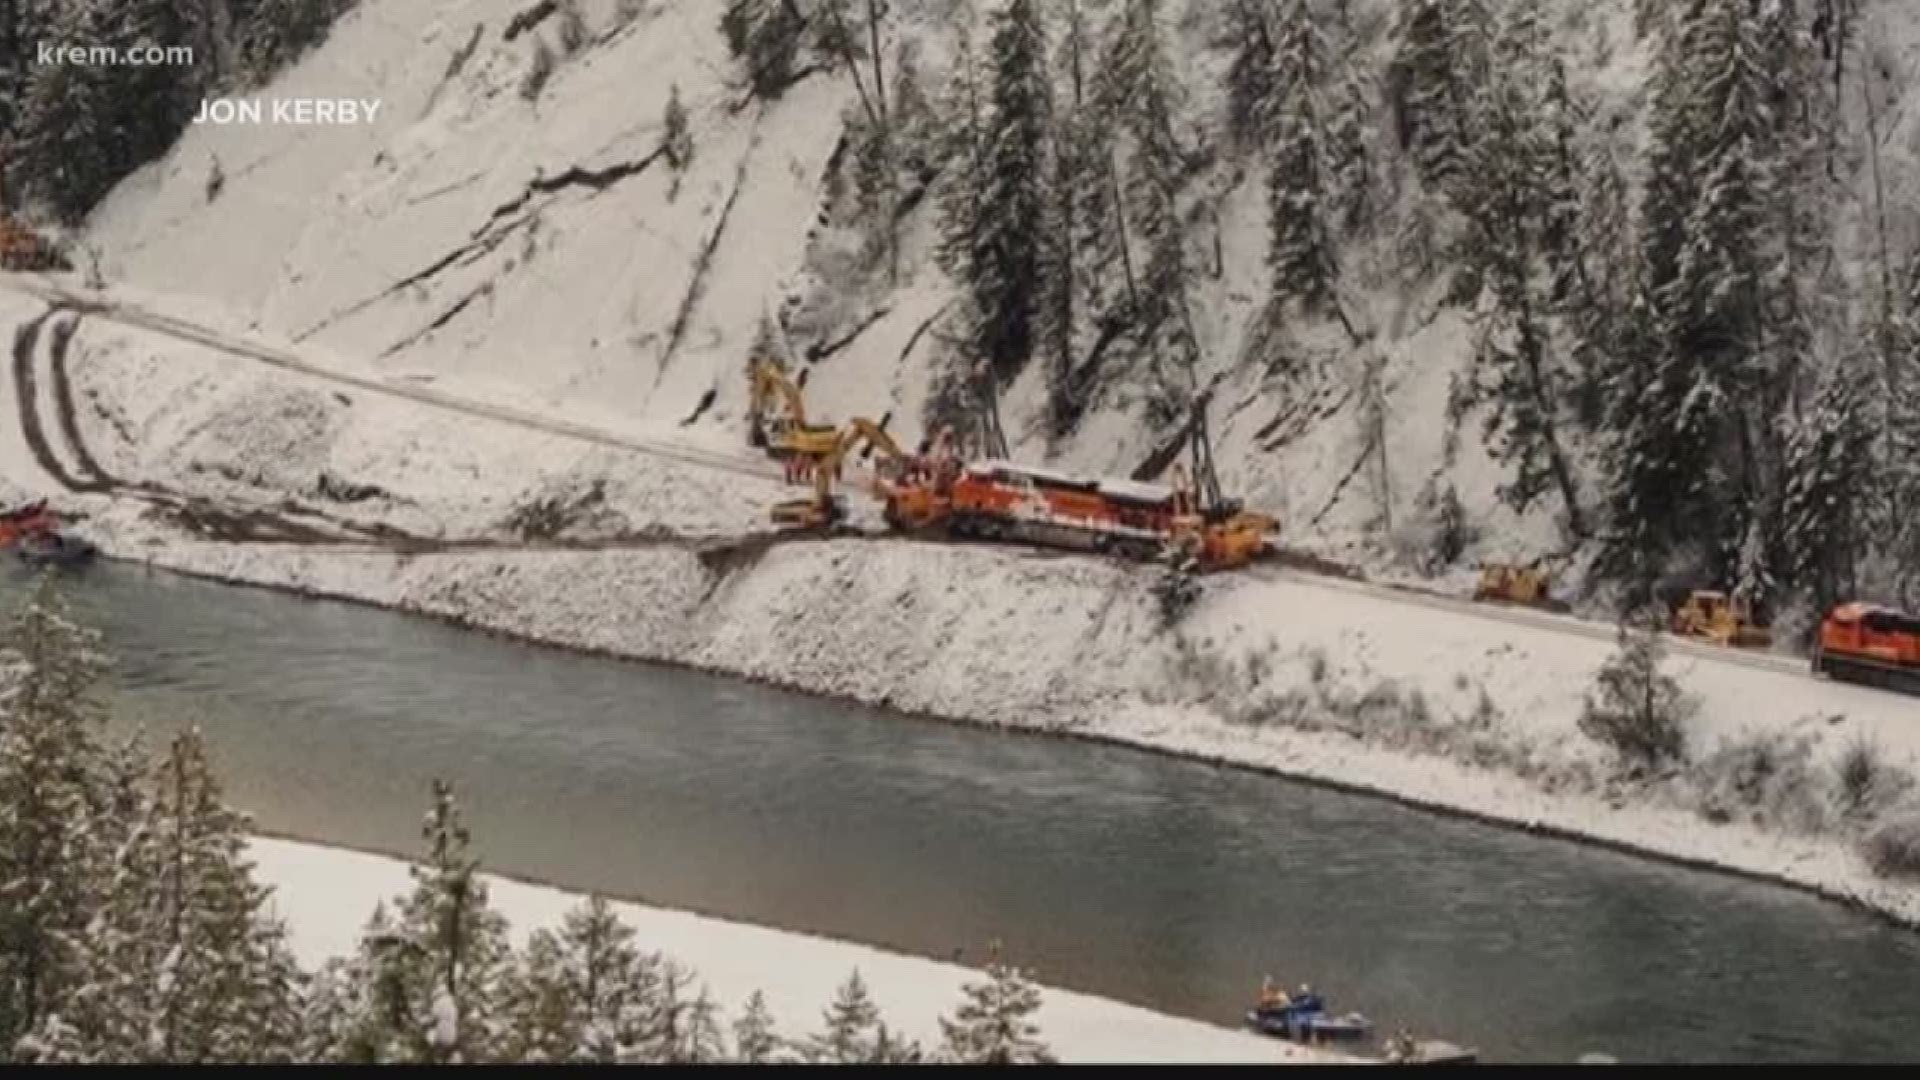 The BNSF train derailed and fell into the river after a rockslide on New Year's Day, causing oil to spill into the Kootenai River.